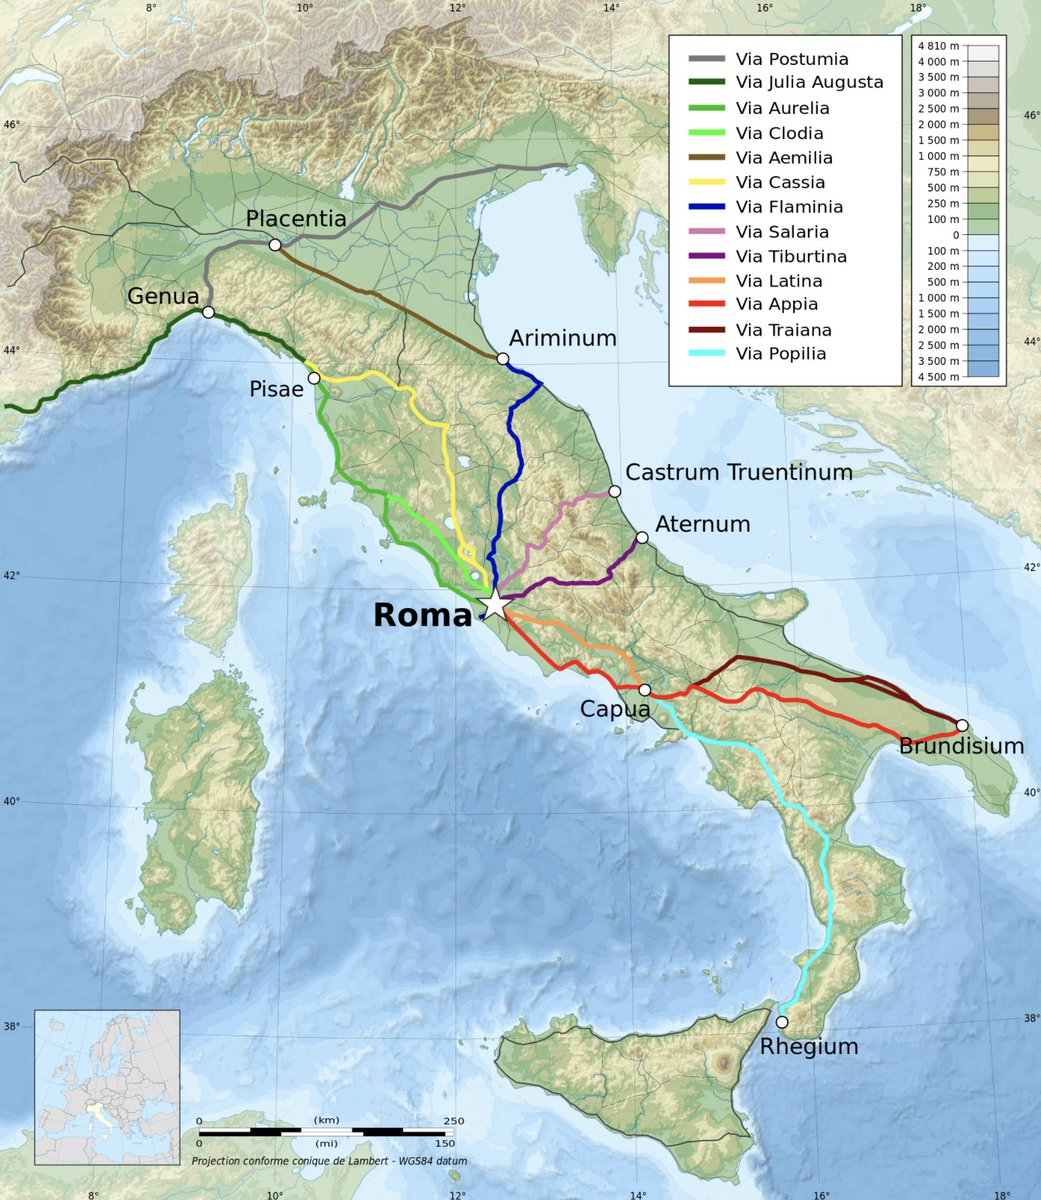 Turns out it was the Via Aemilia that Romans built to control the Po Valley. They built it on the mountainside of the Appenine Mountains, as straight as they could for efficiency, and then built cities along its way! https://en.wikipedia.org/wiki/Via_Aemilia